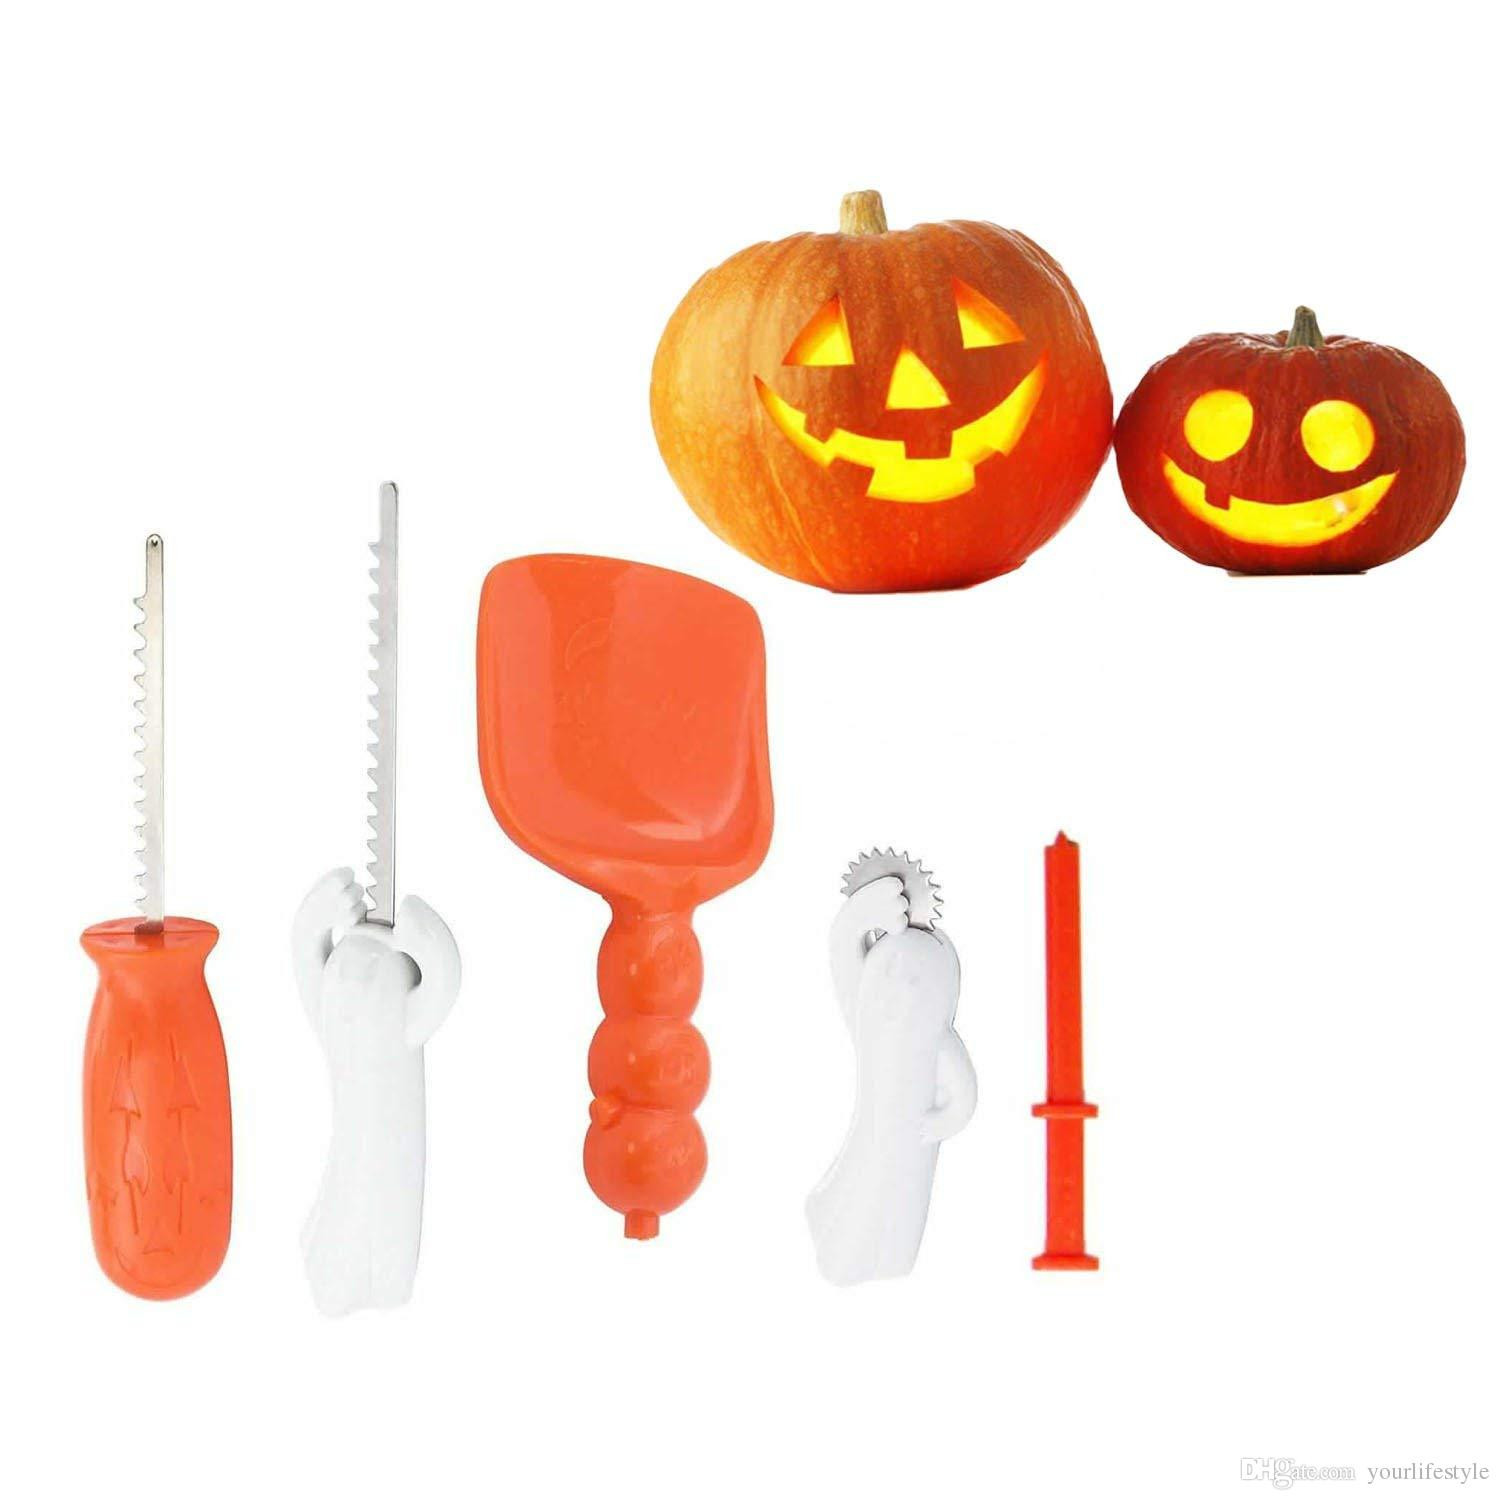 21 Fabulous Pumpkin Vases for Sale 2024 free download pumpkin vases for sale of 2018 pumpkin carving kit for kids easy halloween pumpkin carving regarding 2018 pumpkin carving kit for kids easy halloween pumpkin carving tools set with 10 carvin